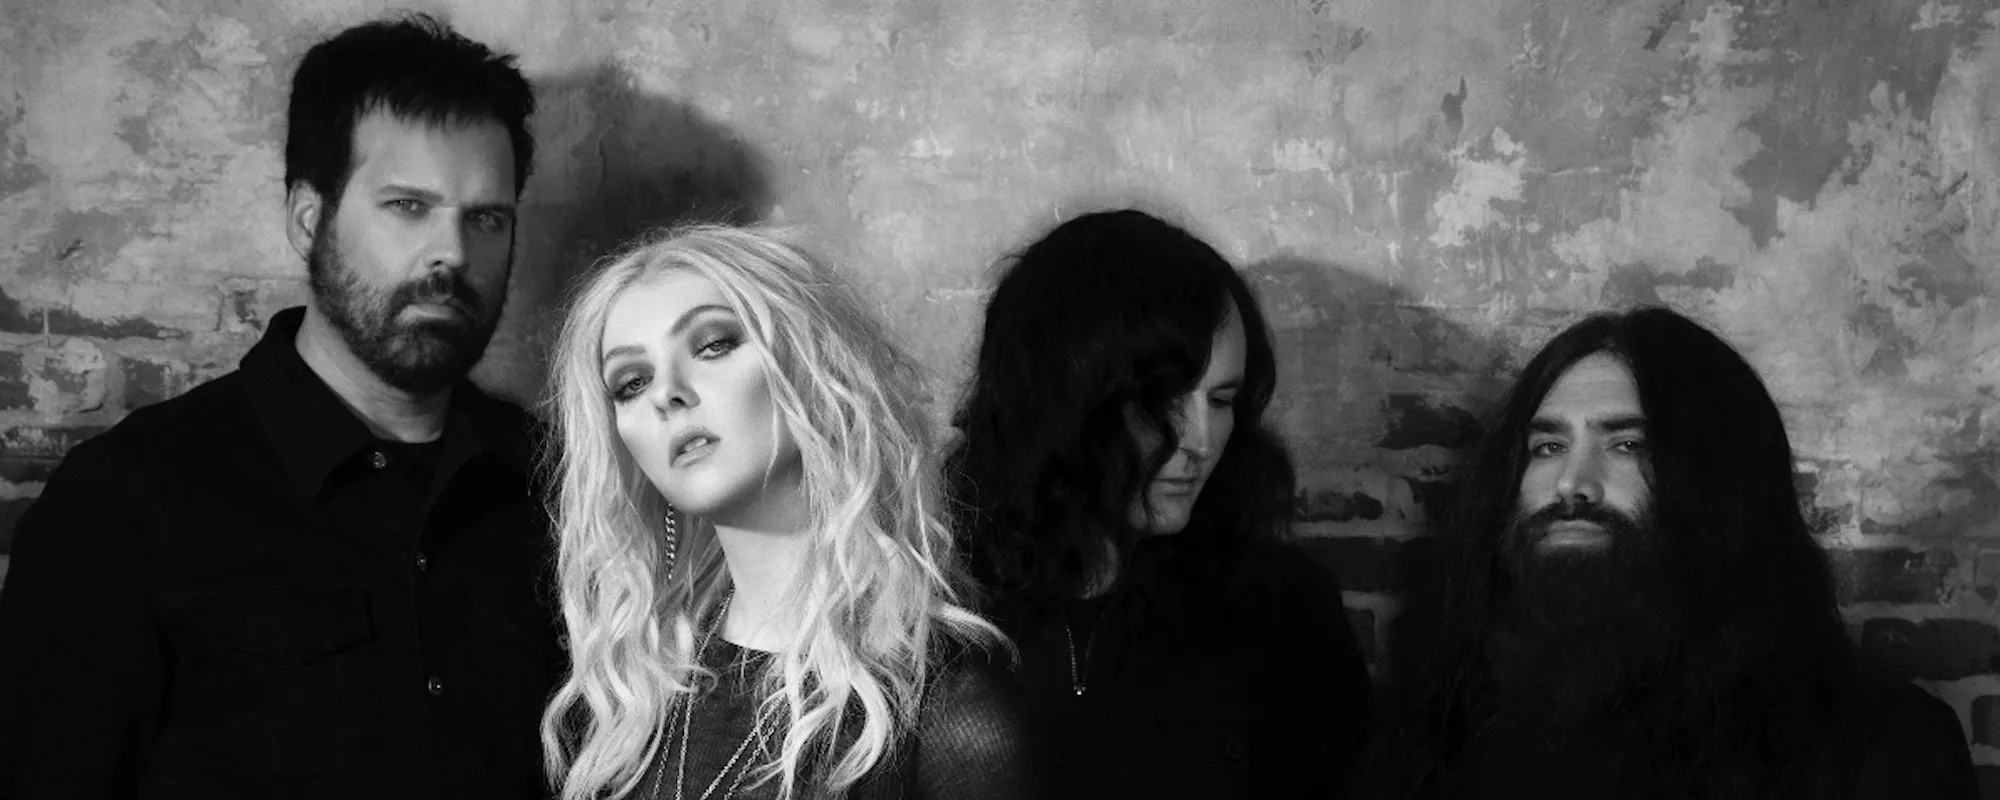 Behind the Band Name: The Pretty Reckless